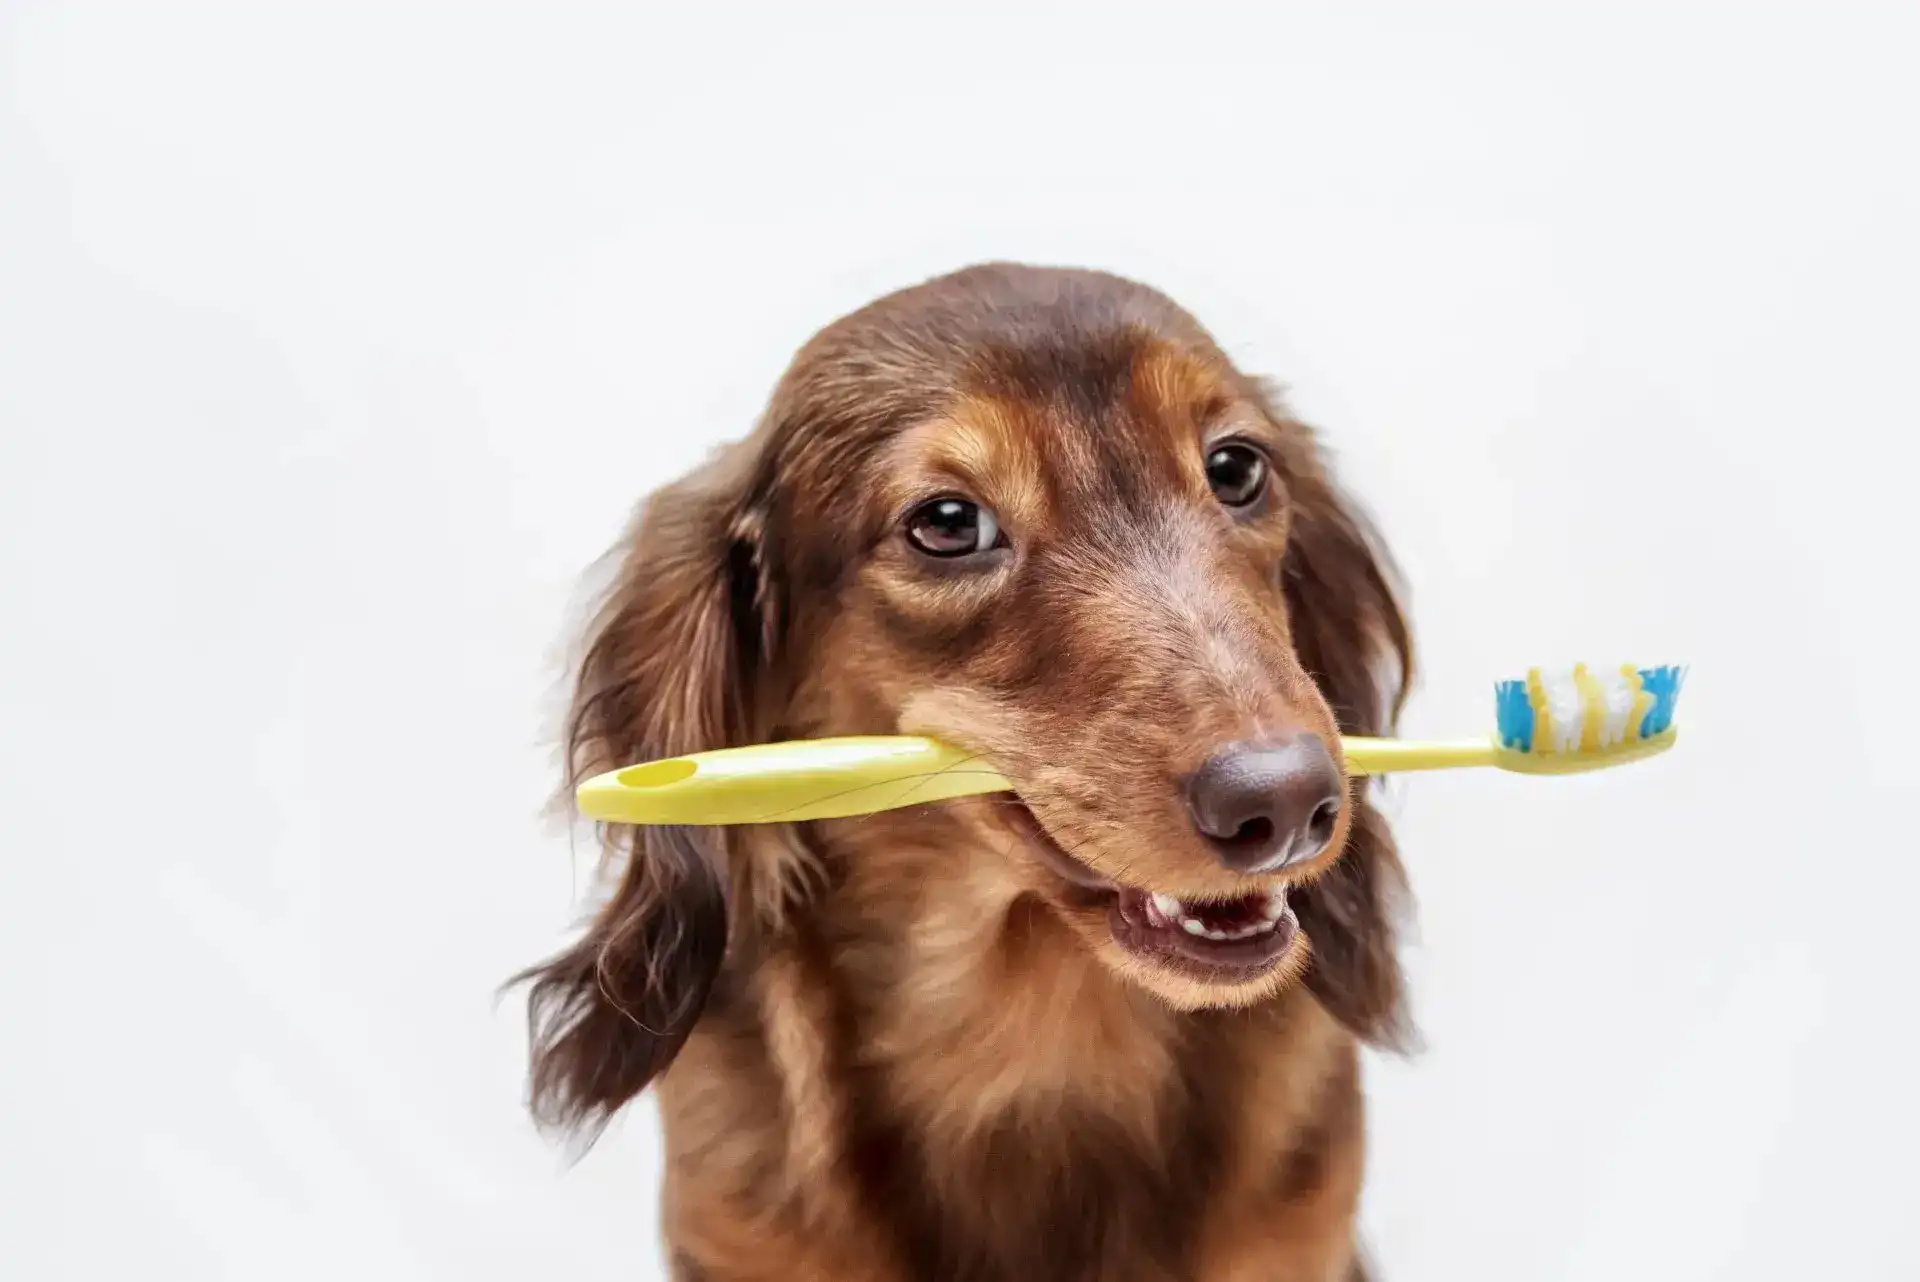 Dog with a toothbrush in its mouth